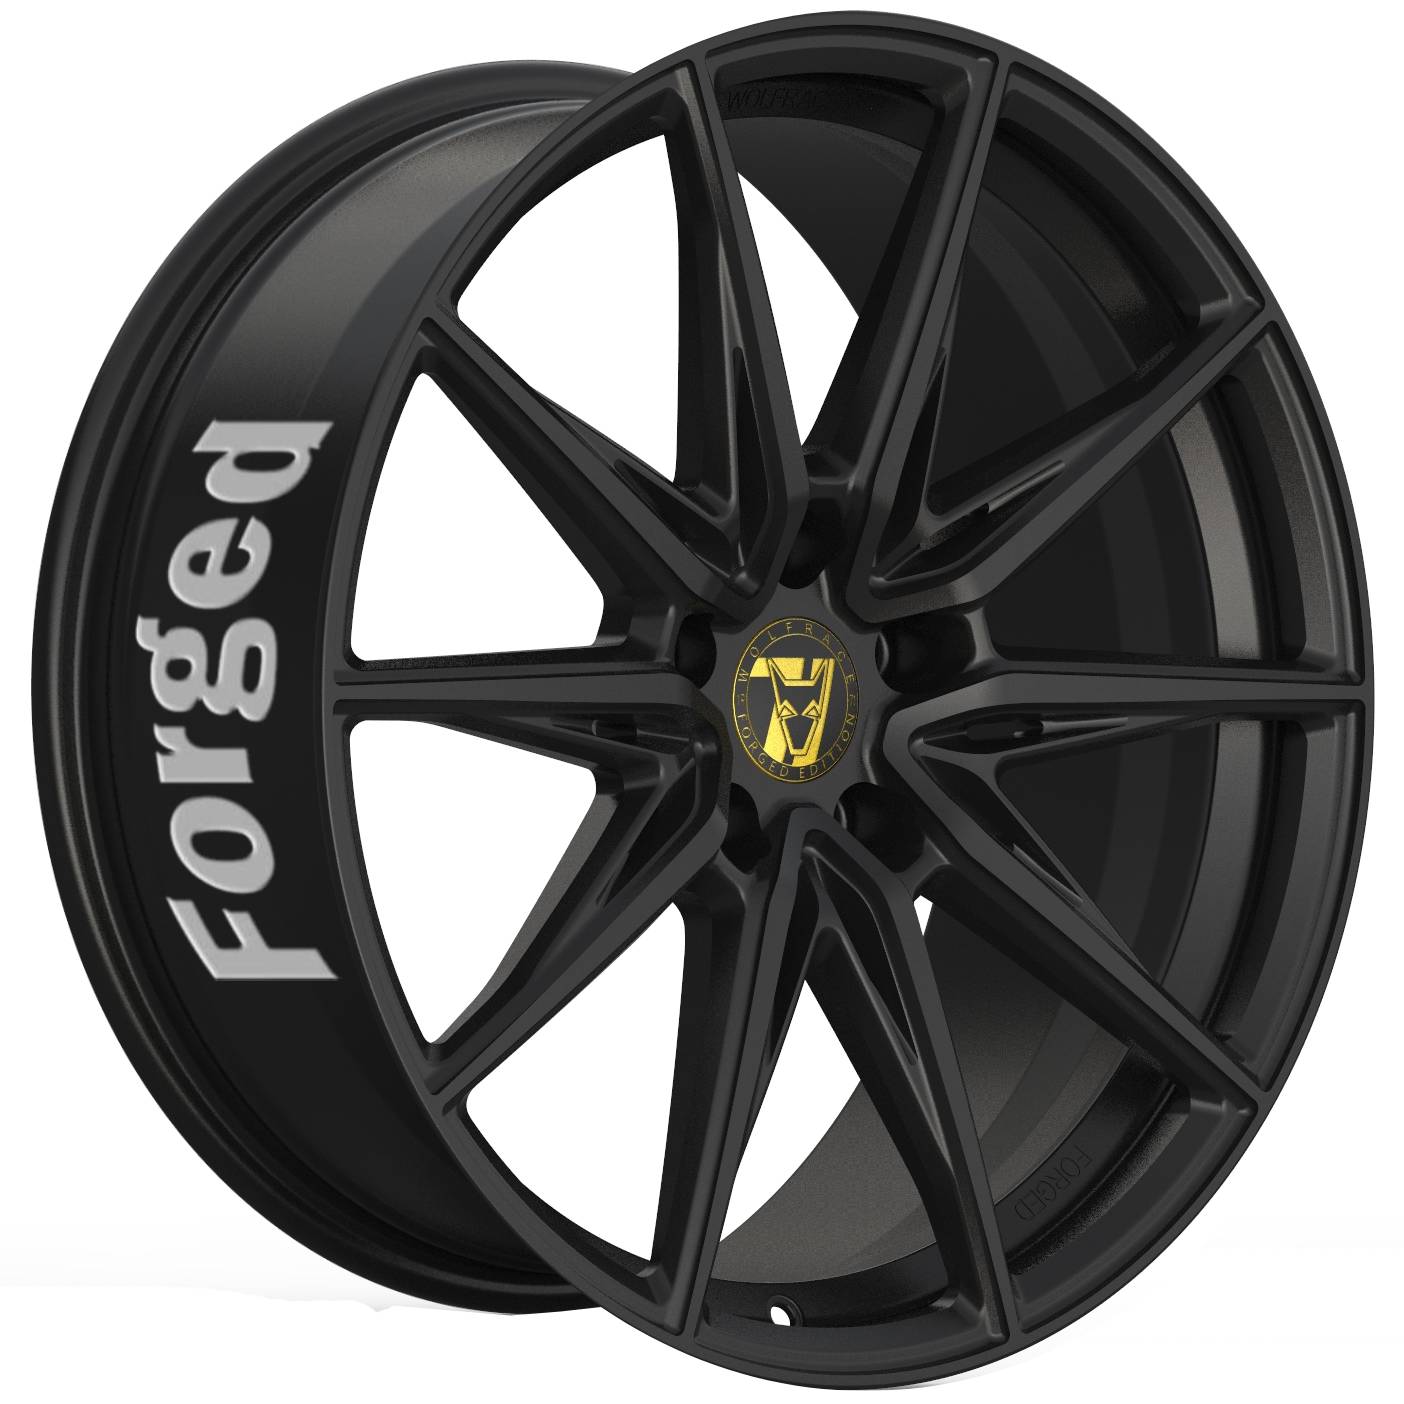 Jantes alu Demon Wheels 71 Forged Edition Urban Racer Forged [13x23] -5x120- ET 40